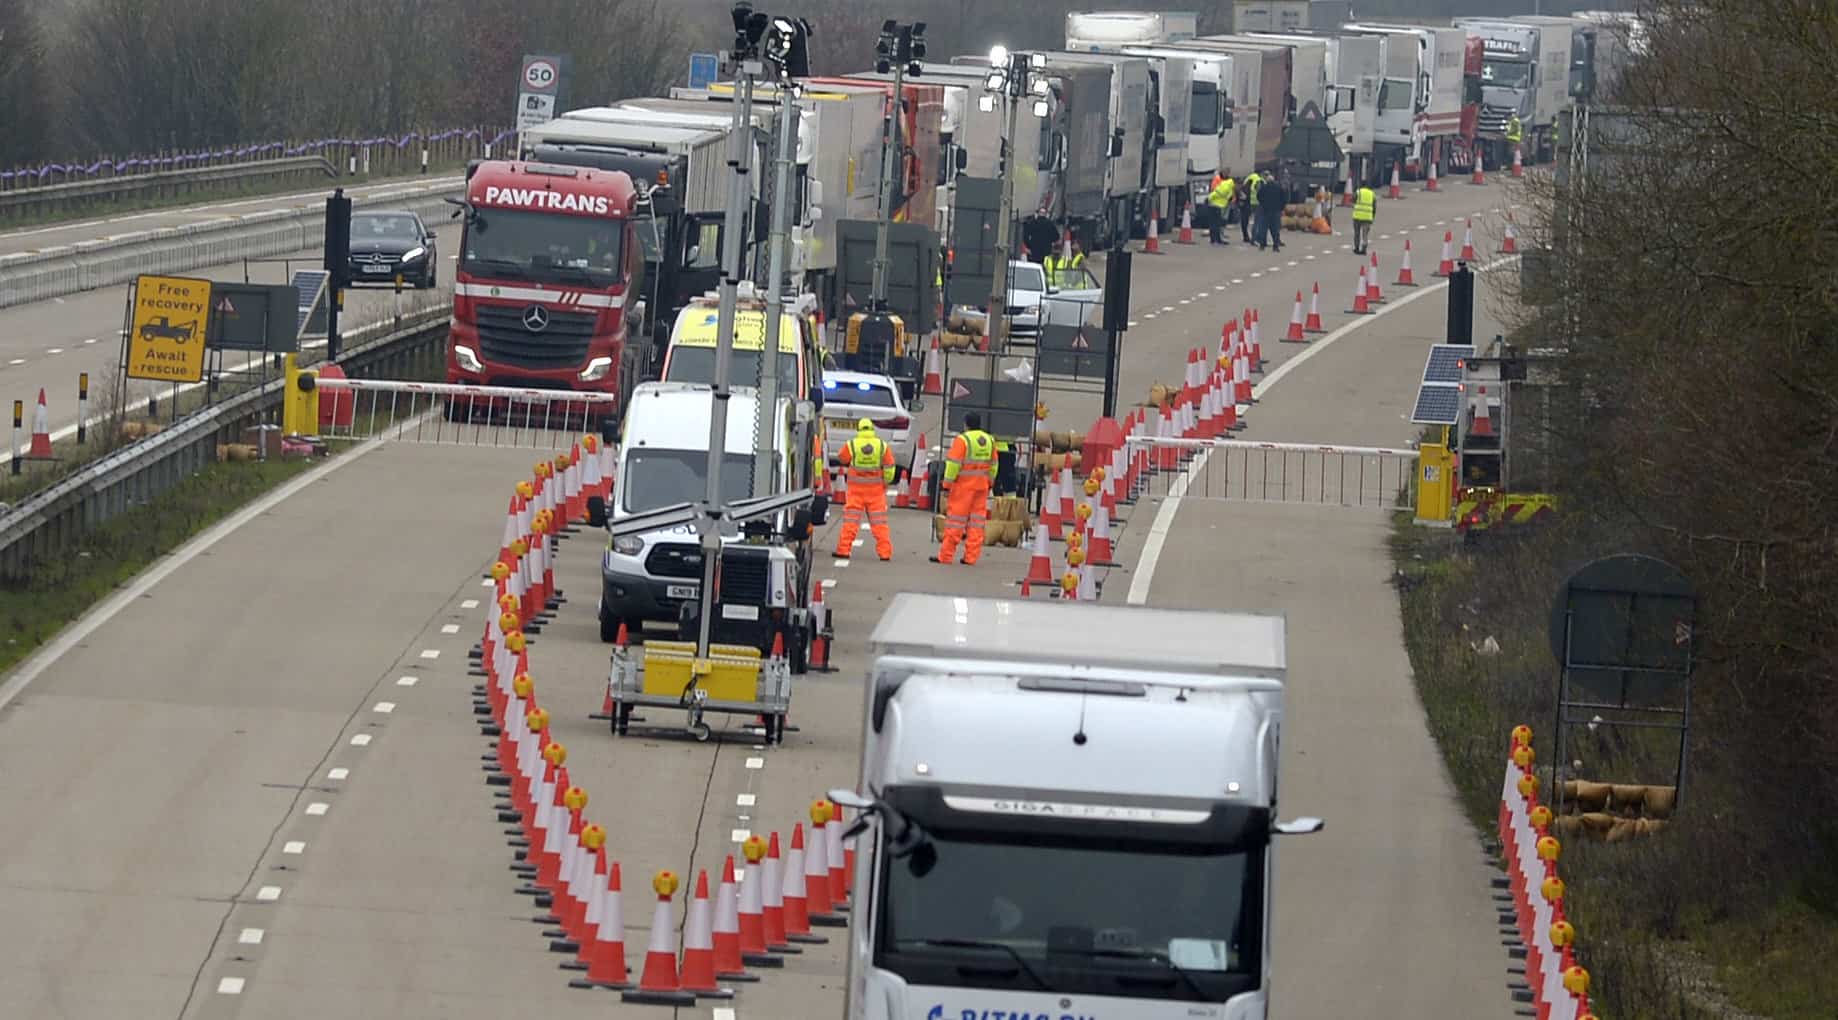 Brexit: List of 33 police forces deployed to Kent to help manage traffic chaos